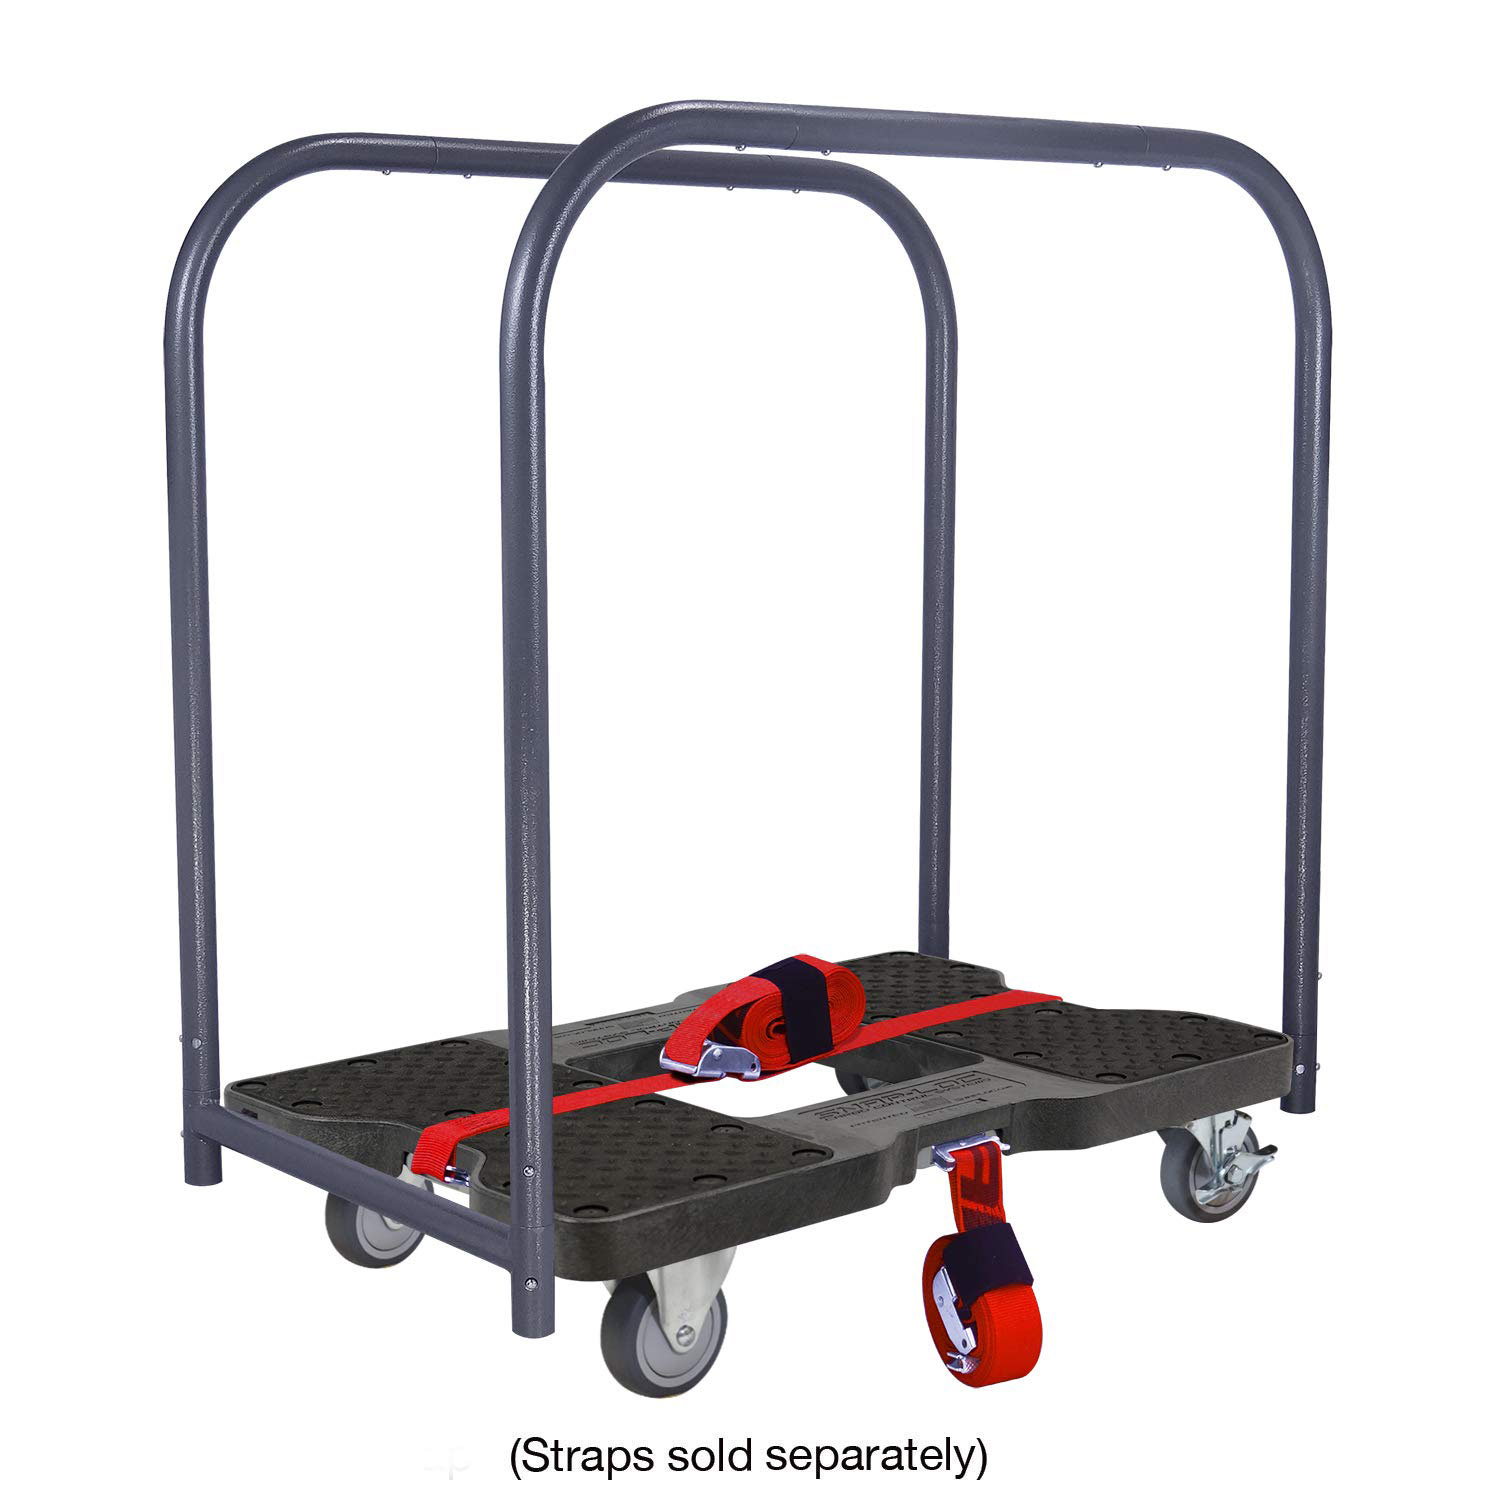 Snap Loc Professional Panel Moving Platform Dolly Cart with 1200 Pound Capacity - image 4 of 7